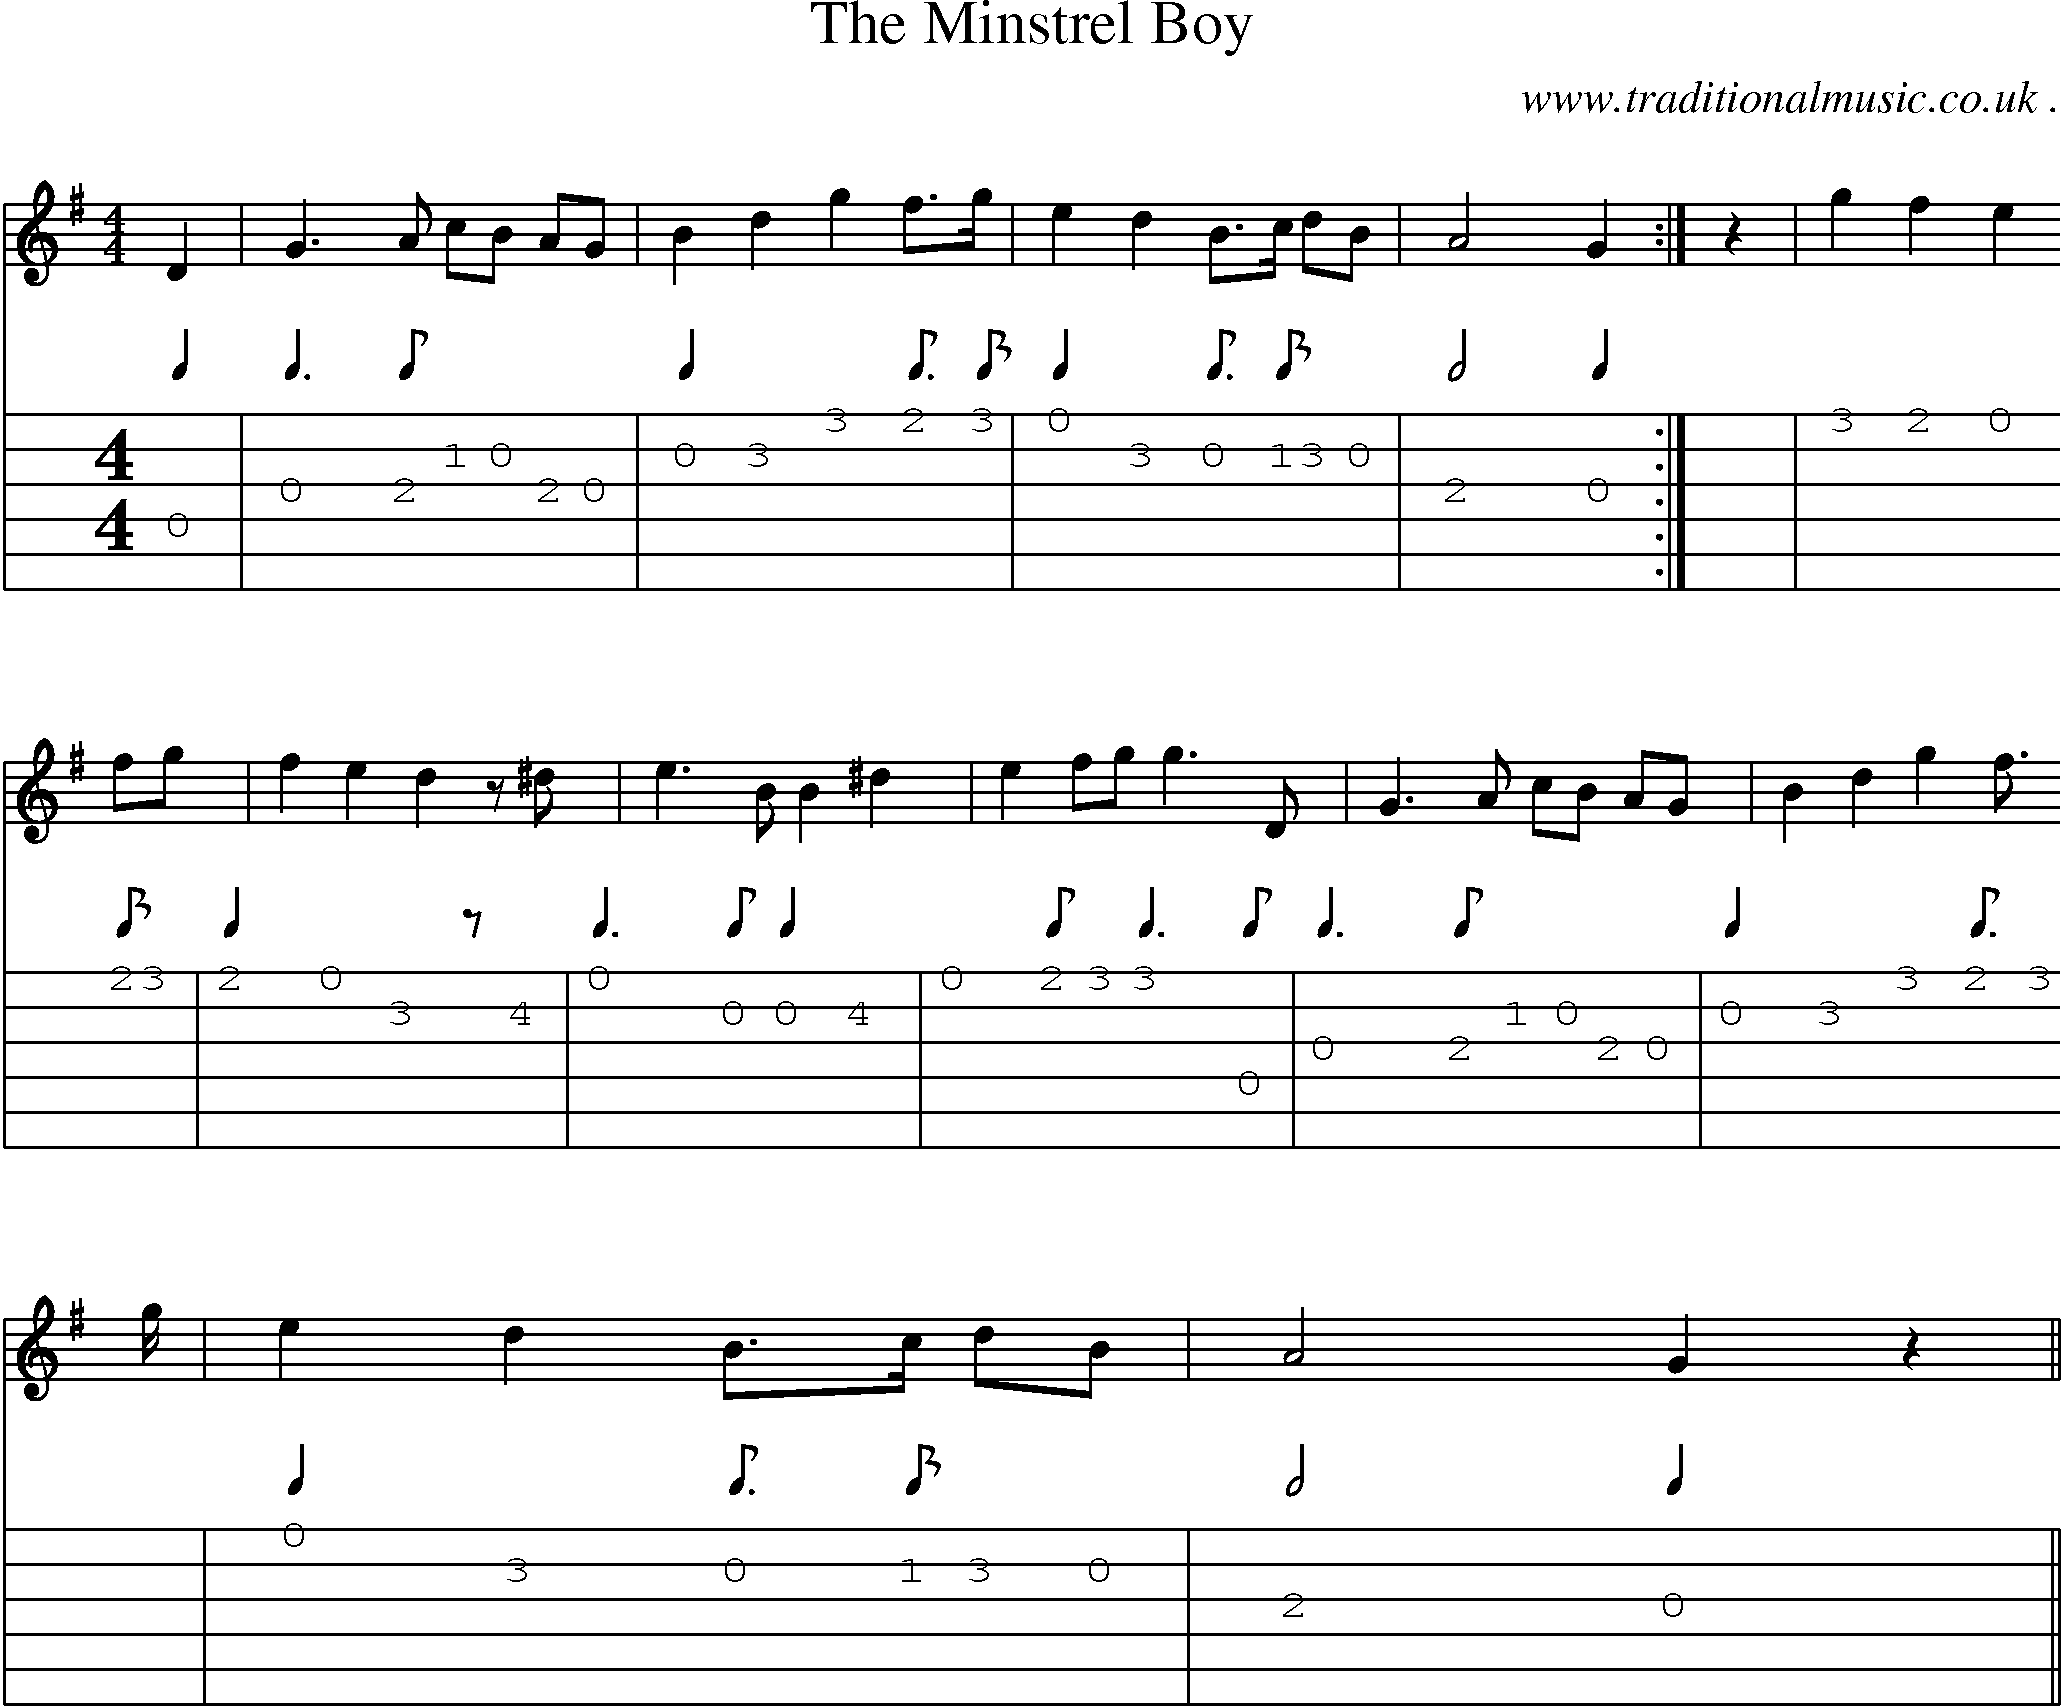 Music Score and Guitar Tabs for The Minstrel Boy